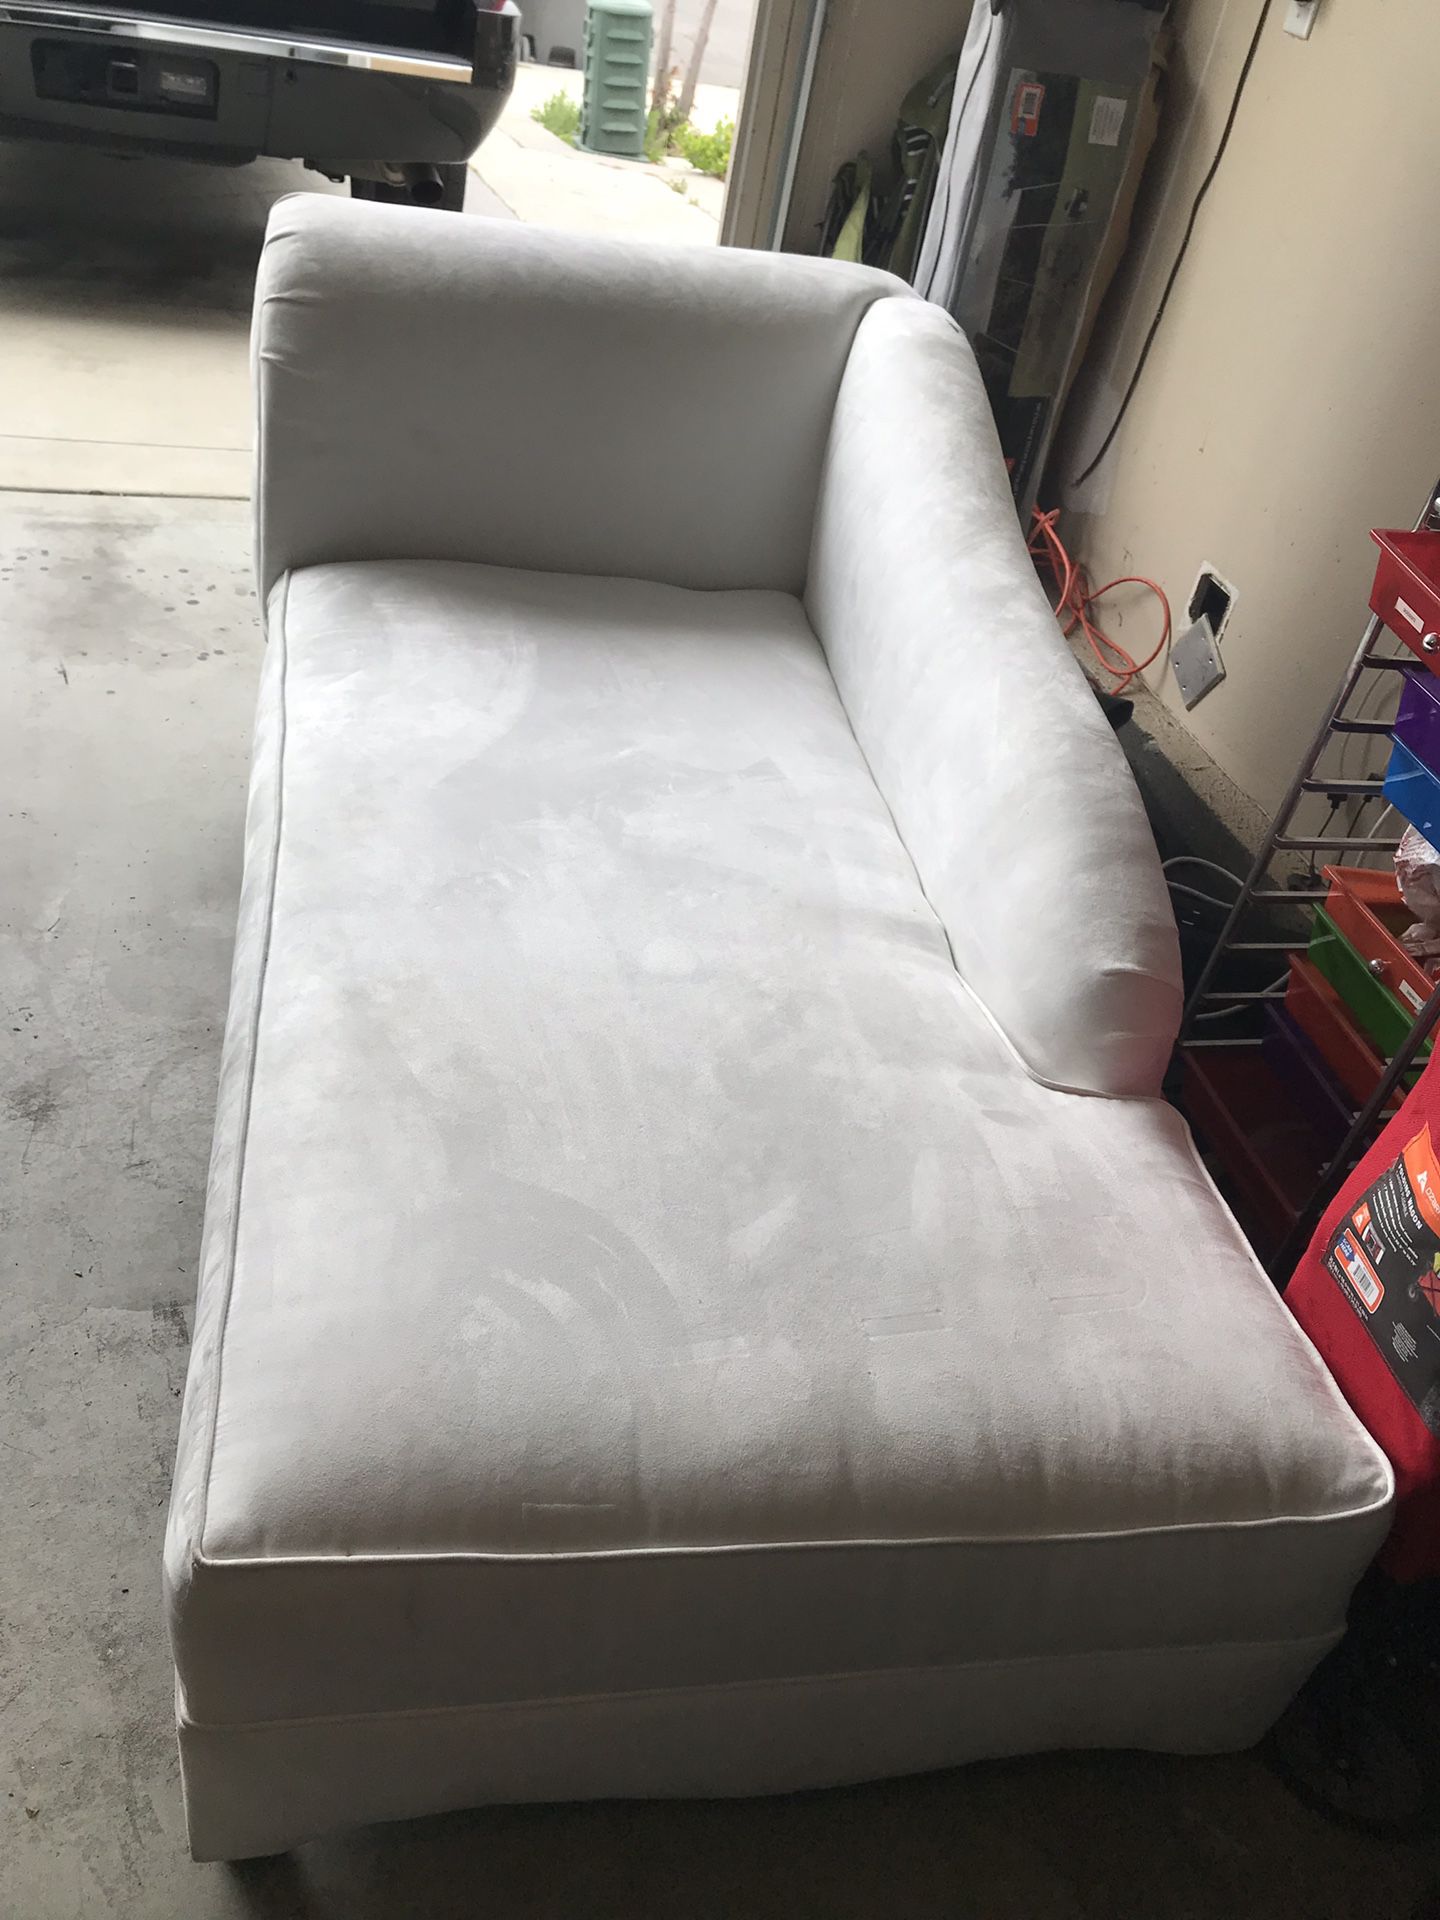 Clean white suede Sleigh couch - pillow included